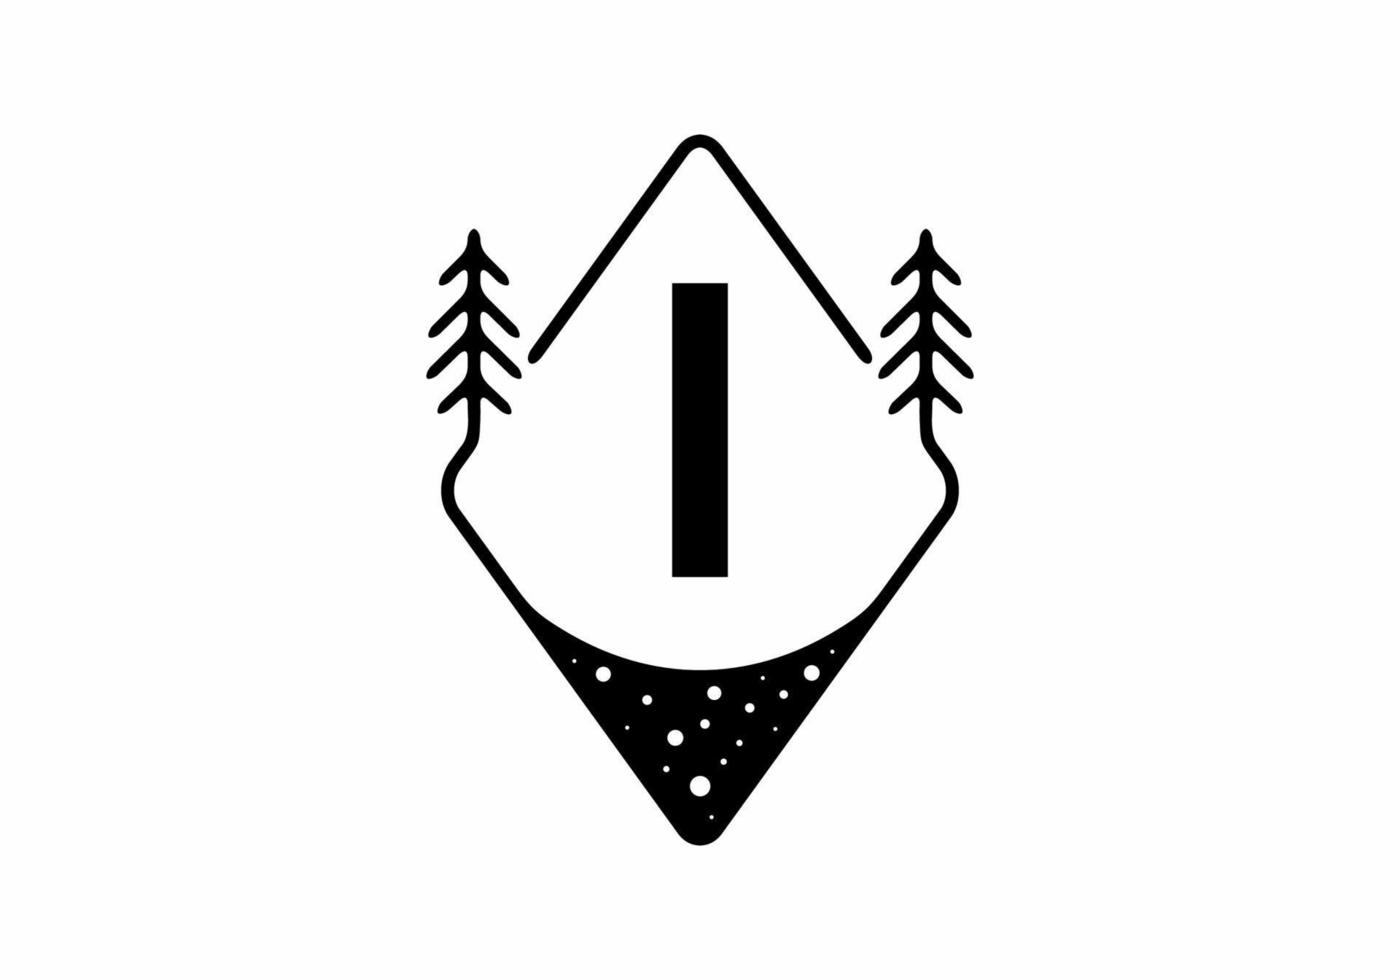 Black line art badge with pine trees and I letter vector